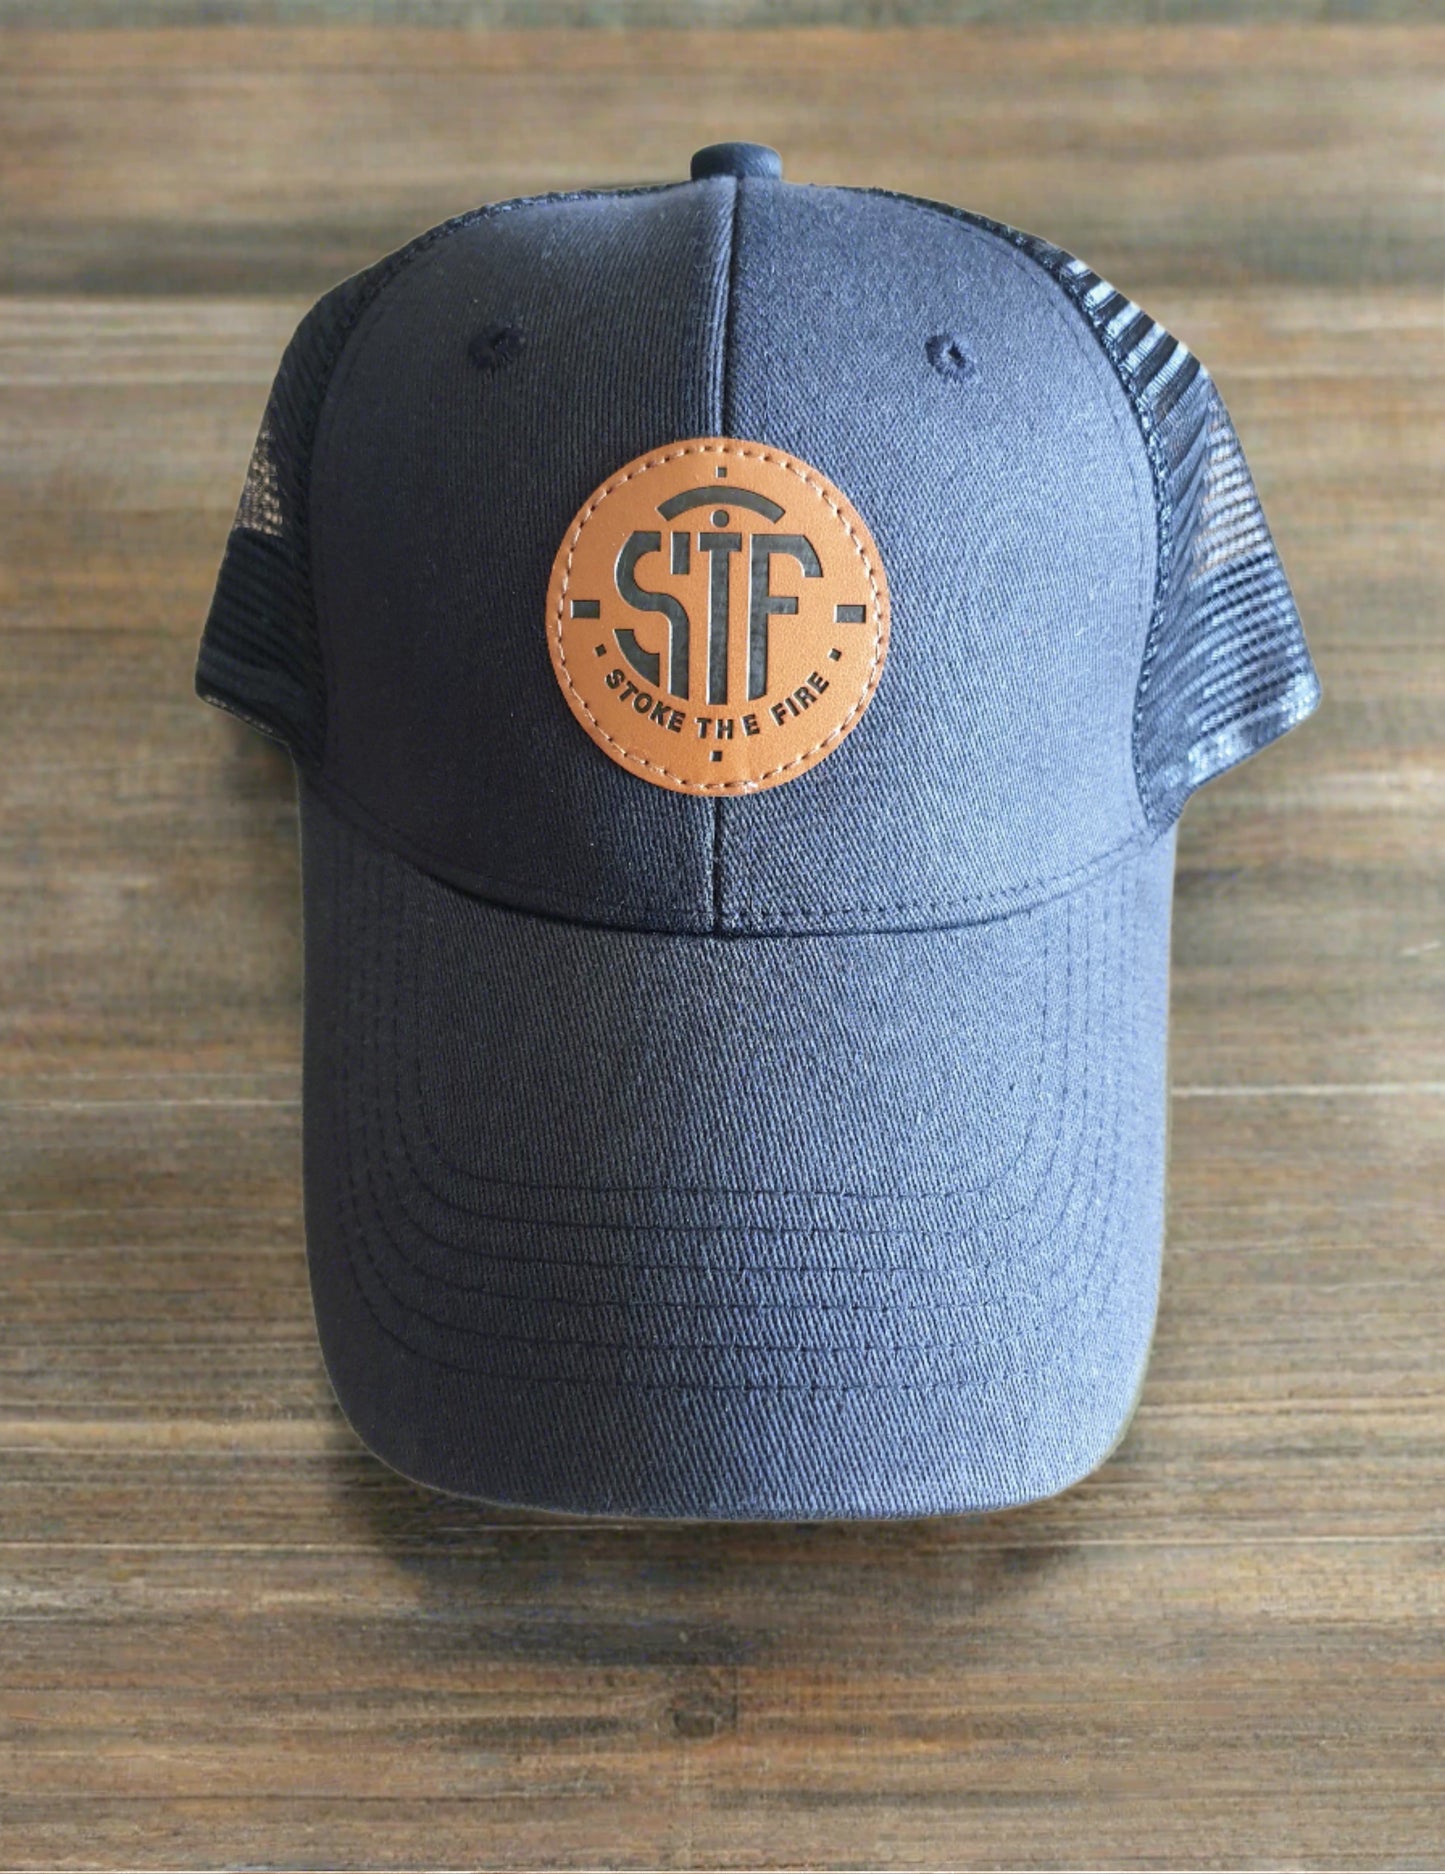 STF Cap LIMITED EDITION